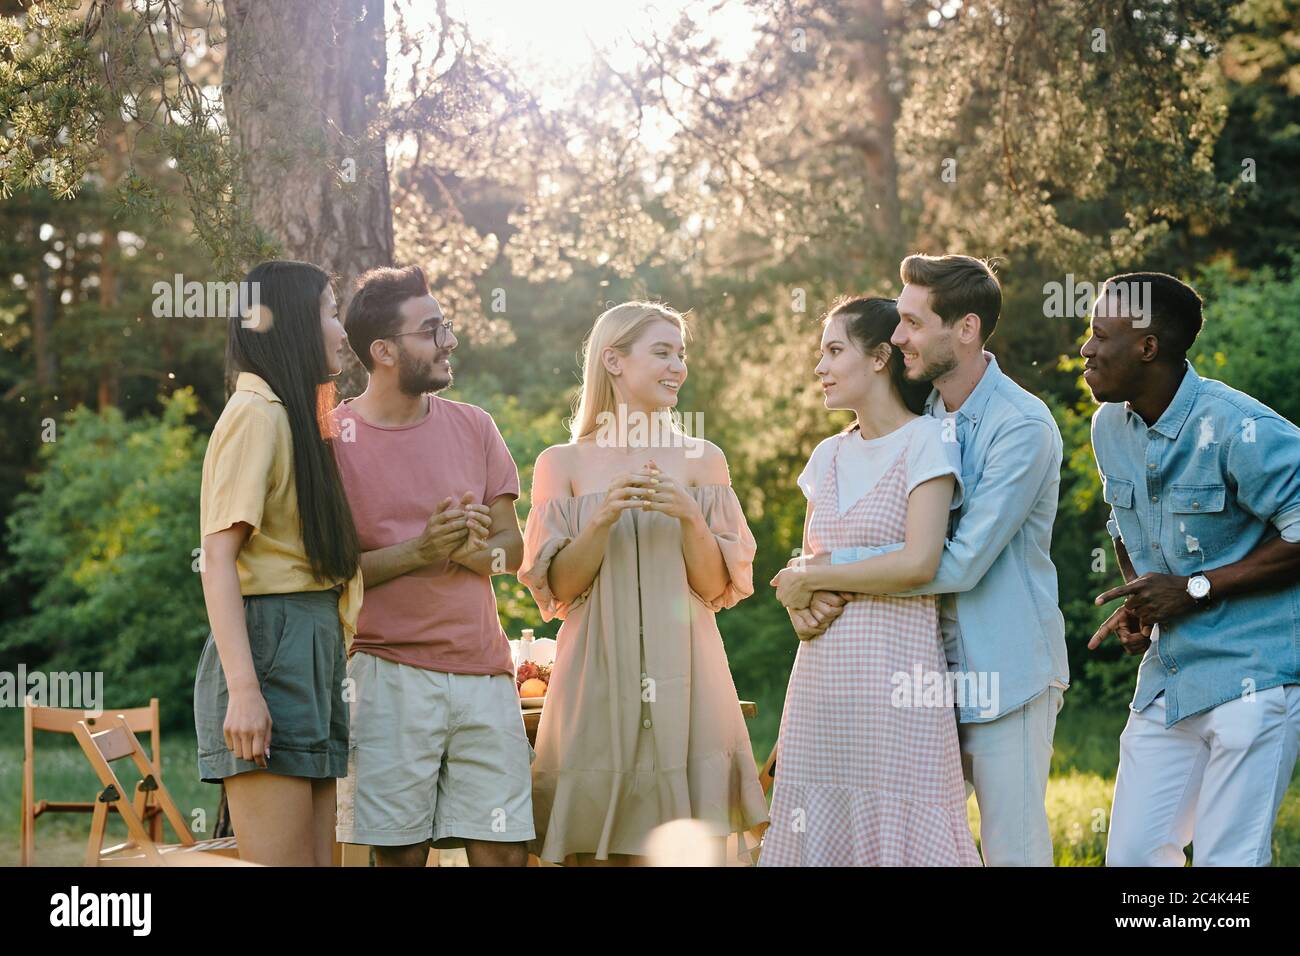 Company of three happy young couples in casualwear discussing news or their plans for summer while gathered together in park Stock Photo